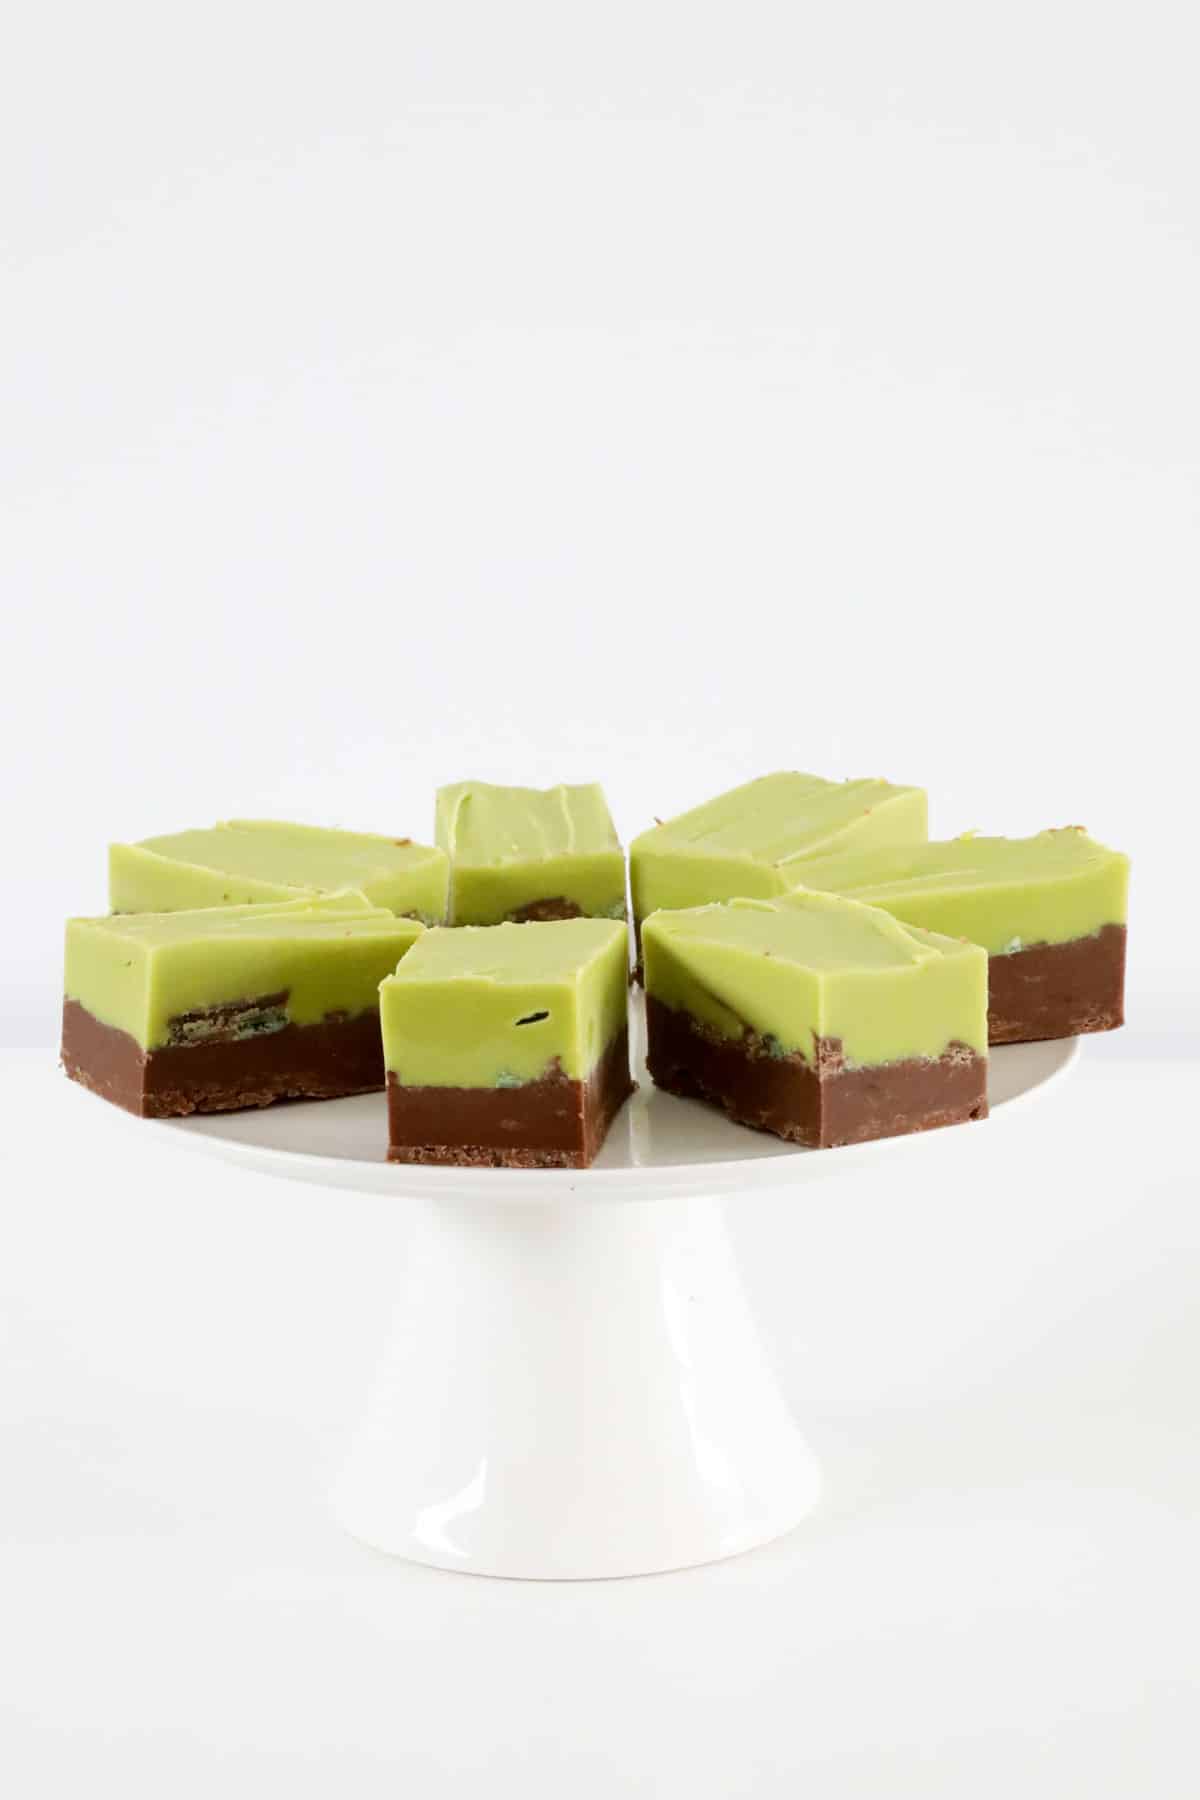 A cake plate topped with green and brown layered fudge.